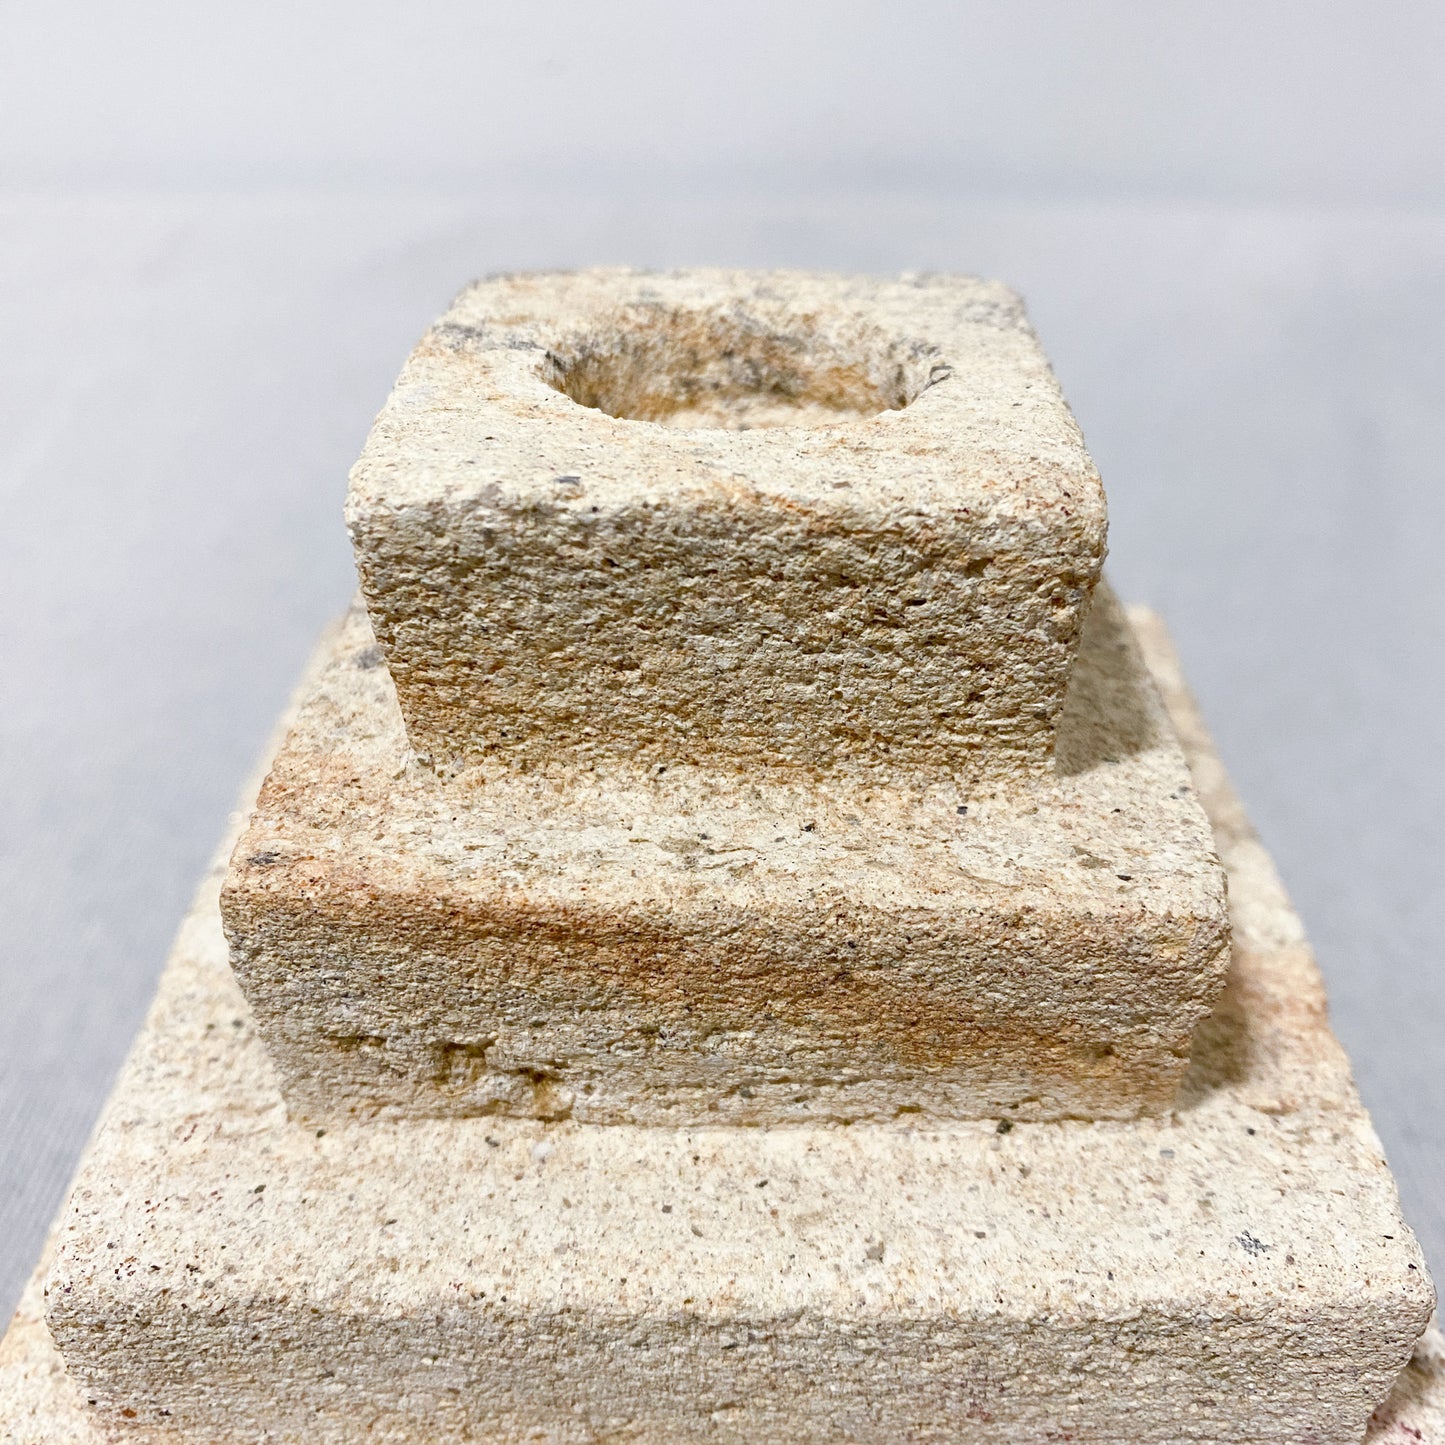 Stone Taper Candle Holder